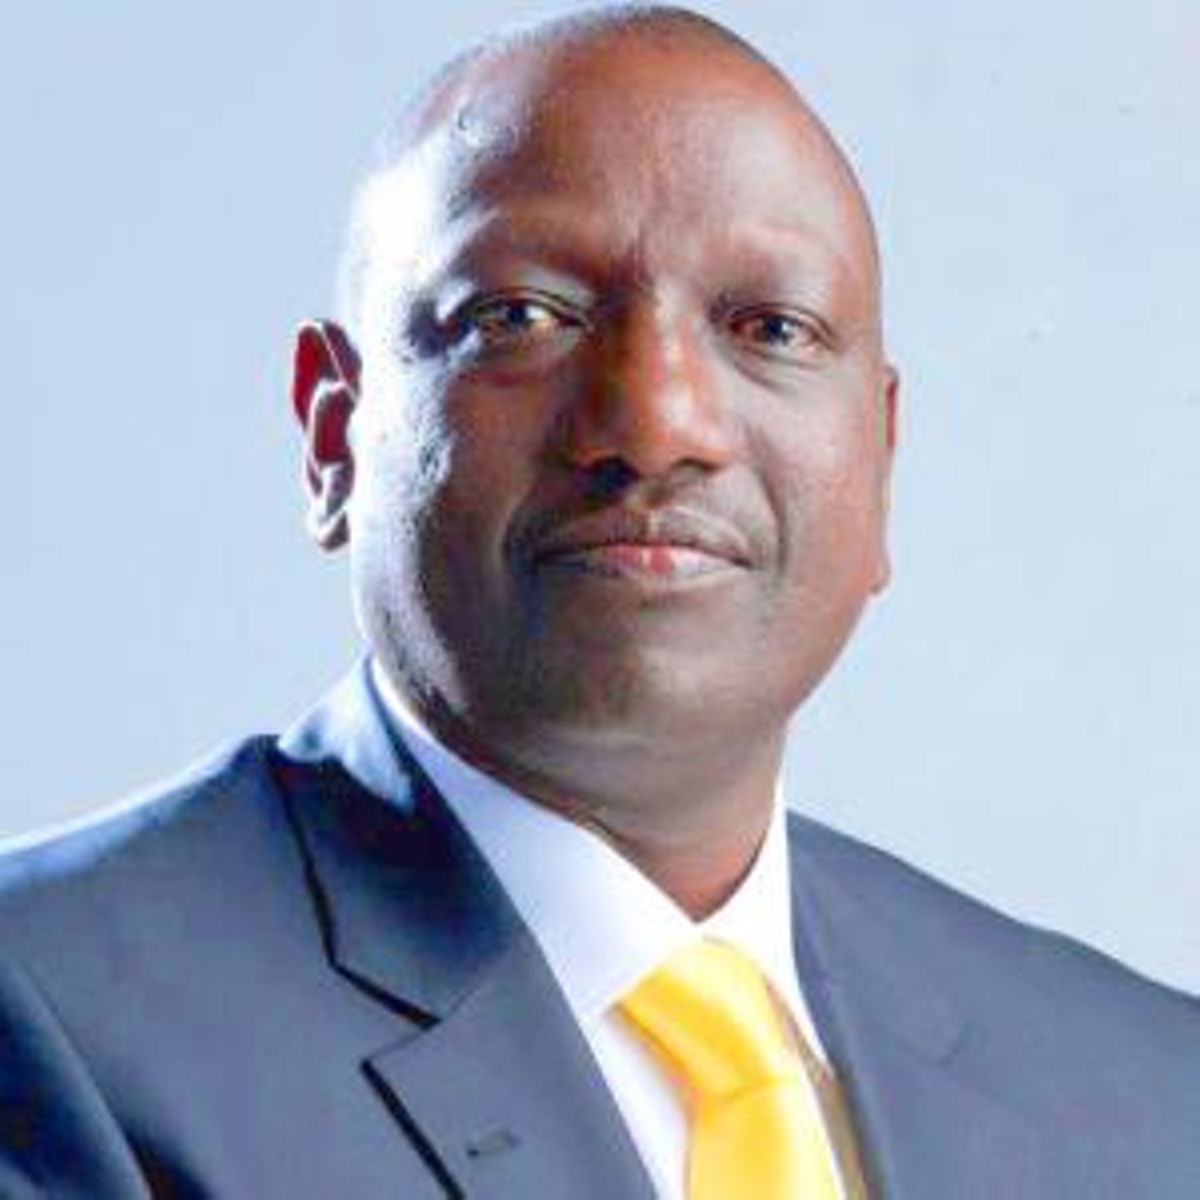 6 interesting things you may not know about DP Ruto ...